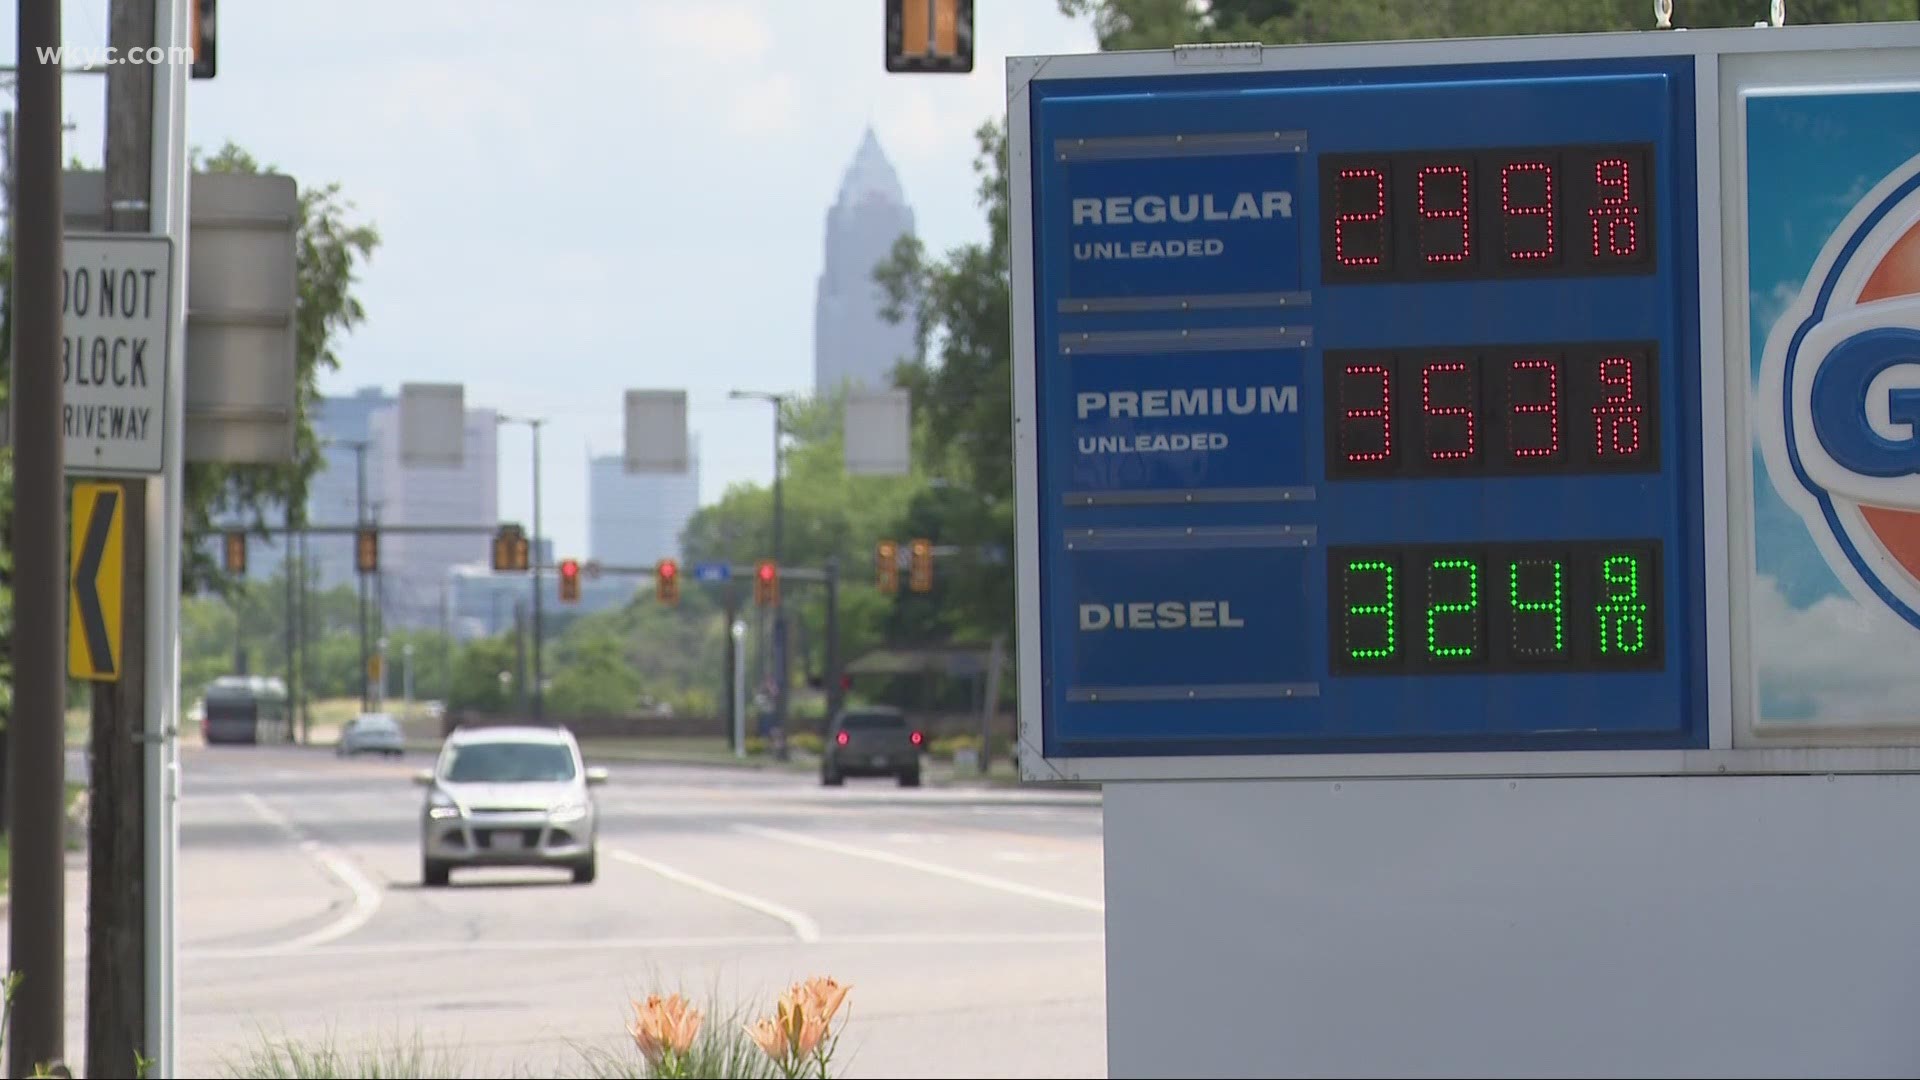 In Northeast Ohio, the concern is over high price spikes. Lindsay Buckingham explains what you can expect to pay at the pump this weekend.